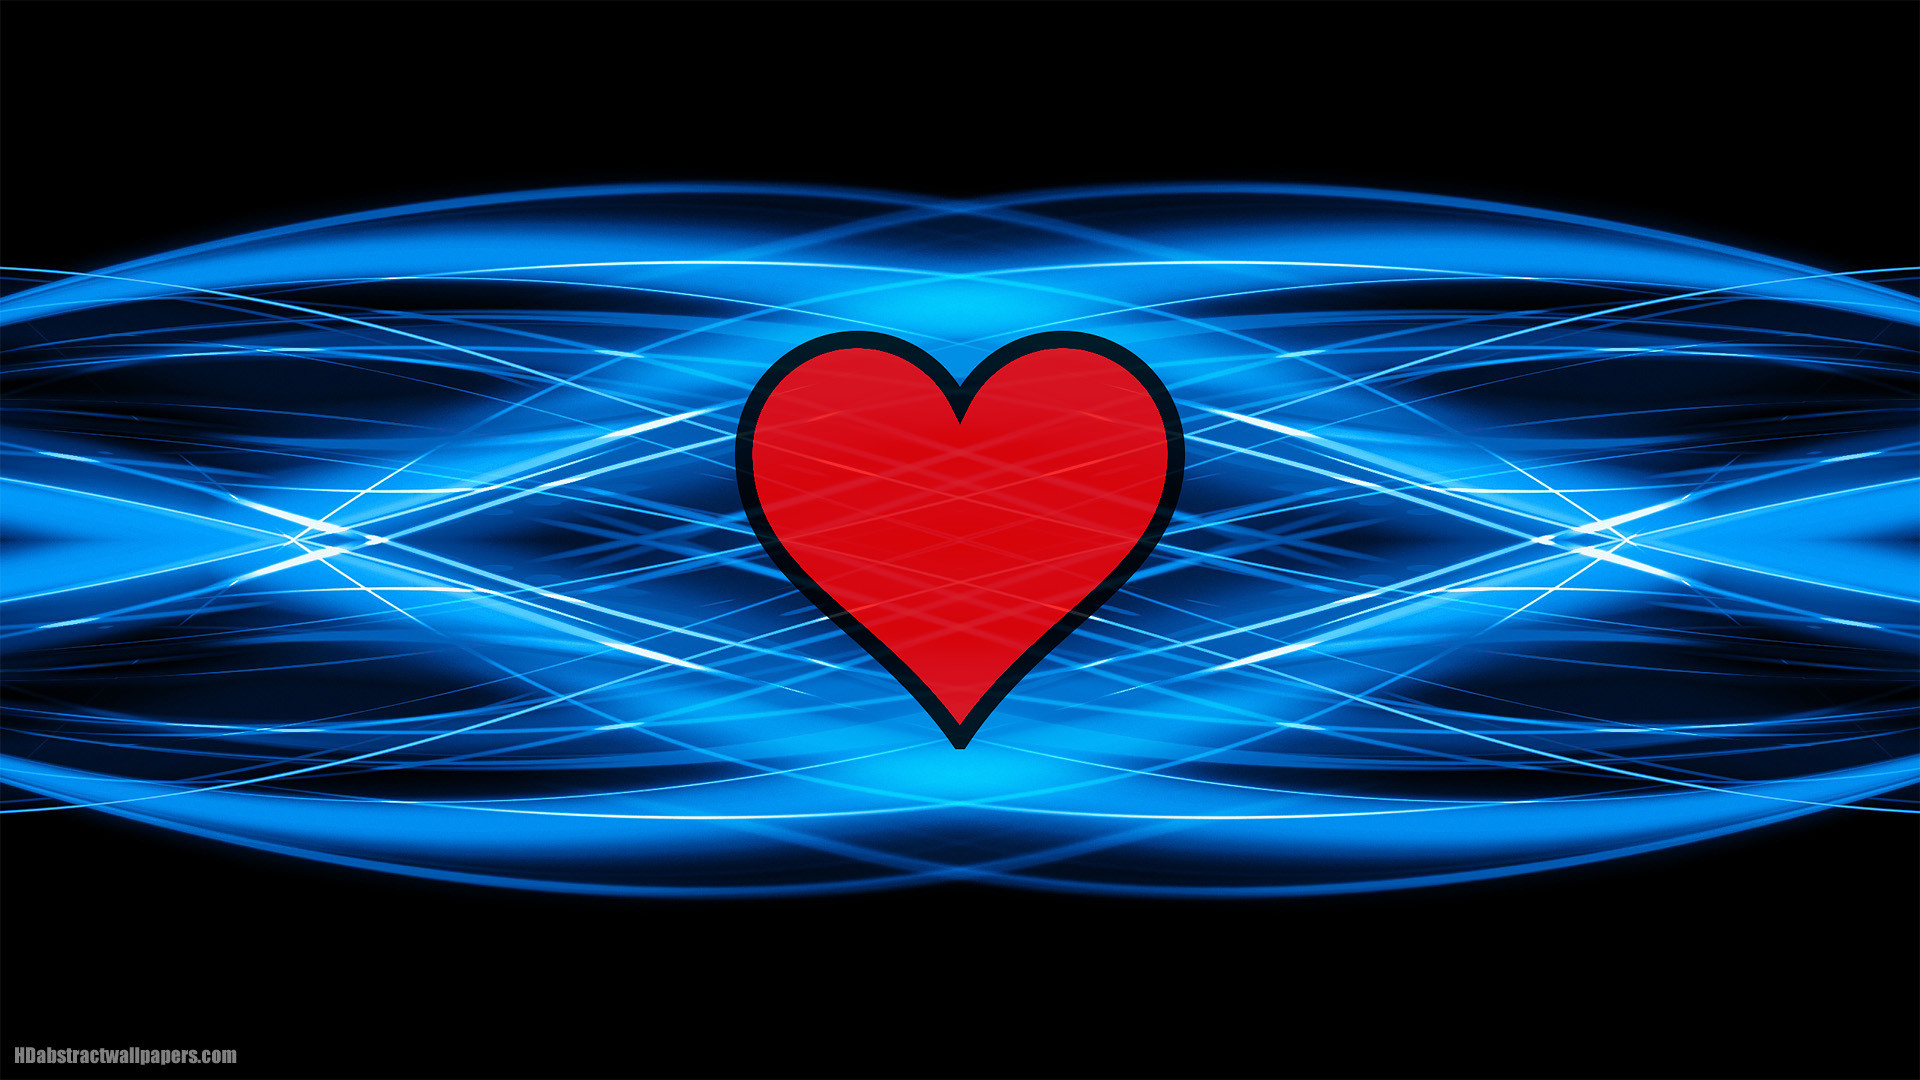 Black blue abstract background with red love heart in the middle, very  clean and modern abstract wallpaper. In HD quality resolution 1920×1080.